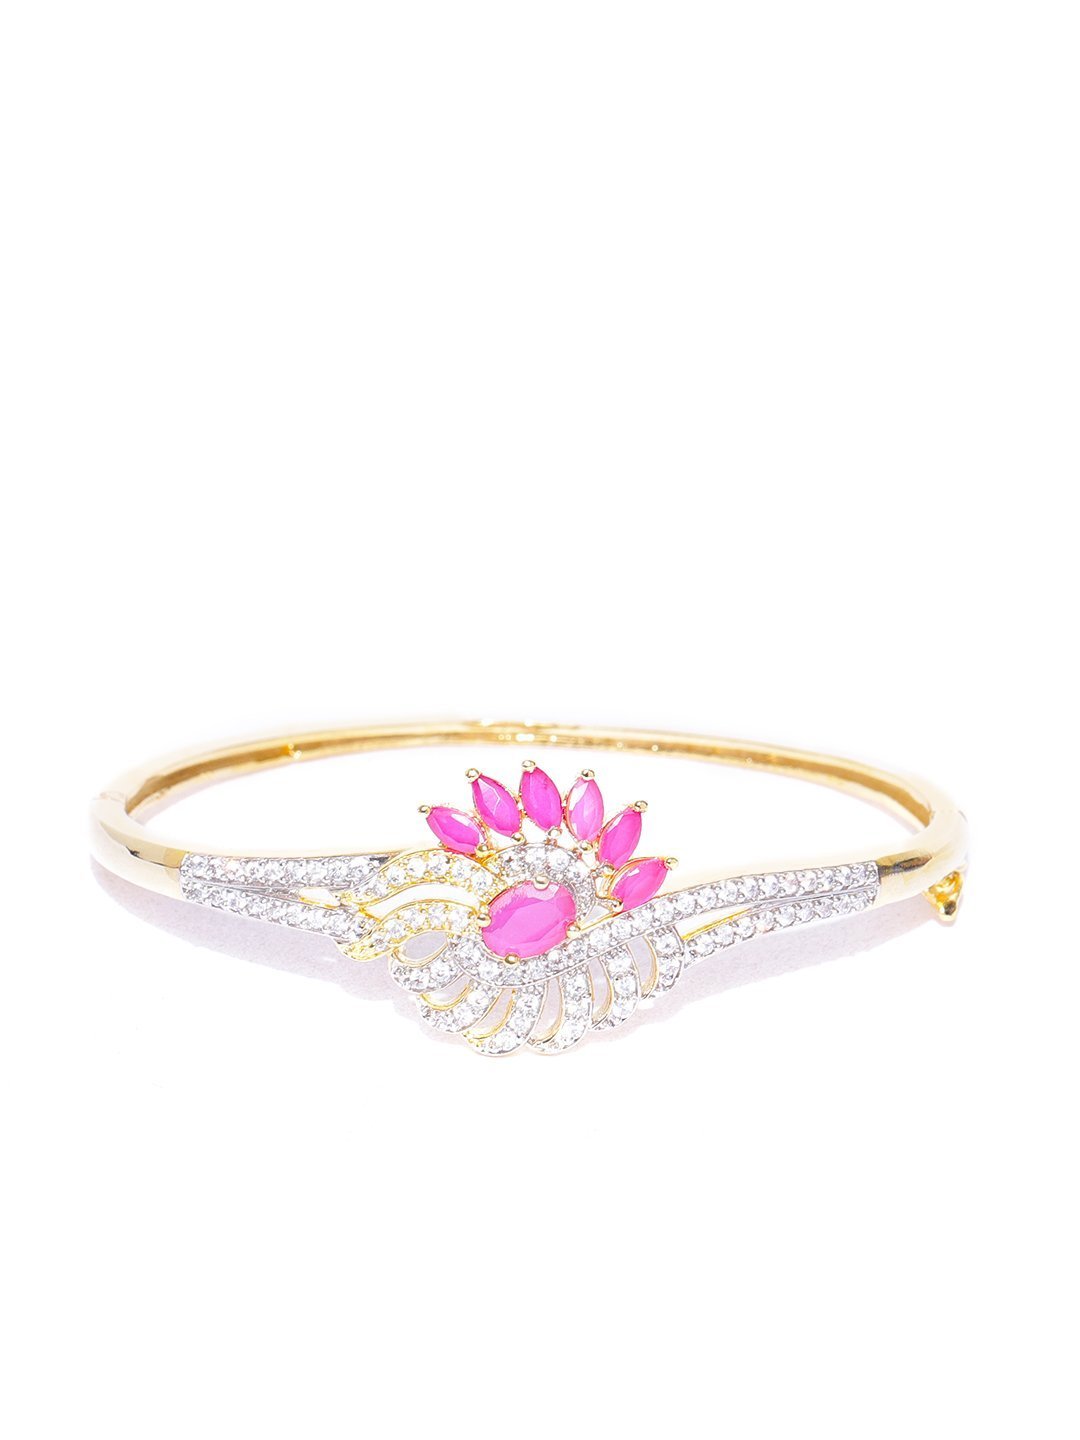 Women's Gold-Plated Pink, American Diamond and Ruby Studded Bracelet in Floral Pattern - Priyaasi